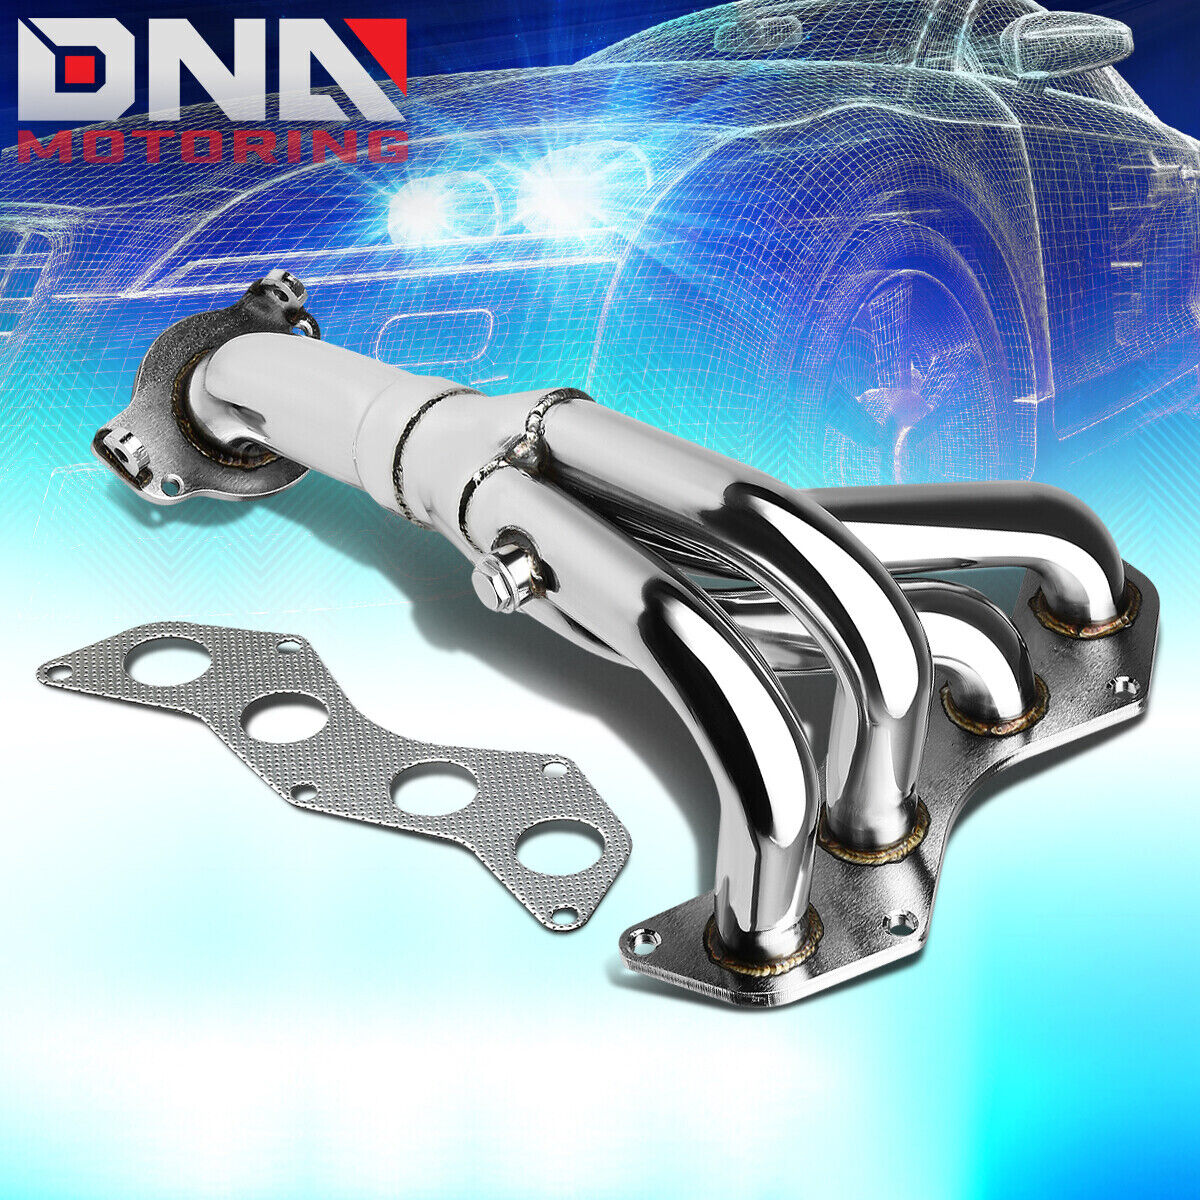 STAINLESS STEEL 4-1 HEADER FOR 05-10 SCION tC 2.4L l4 4CYL DOHC EXHAUST/MANIFOLD